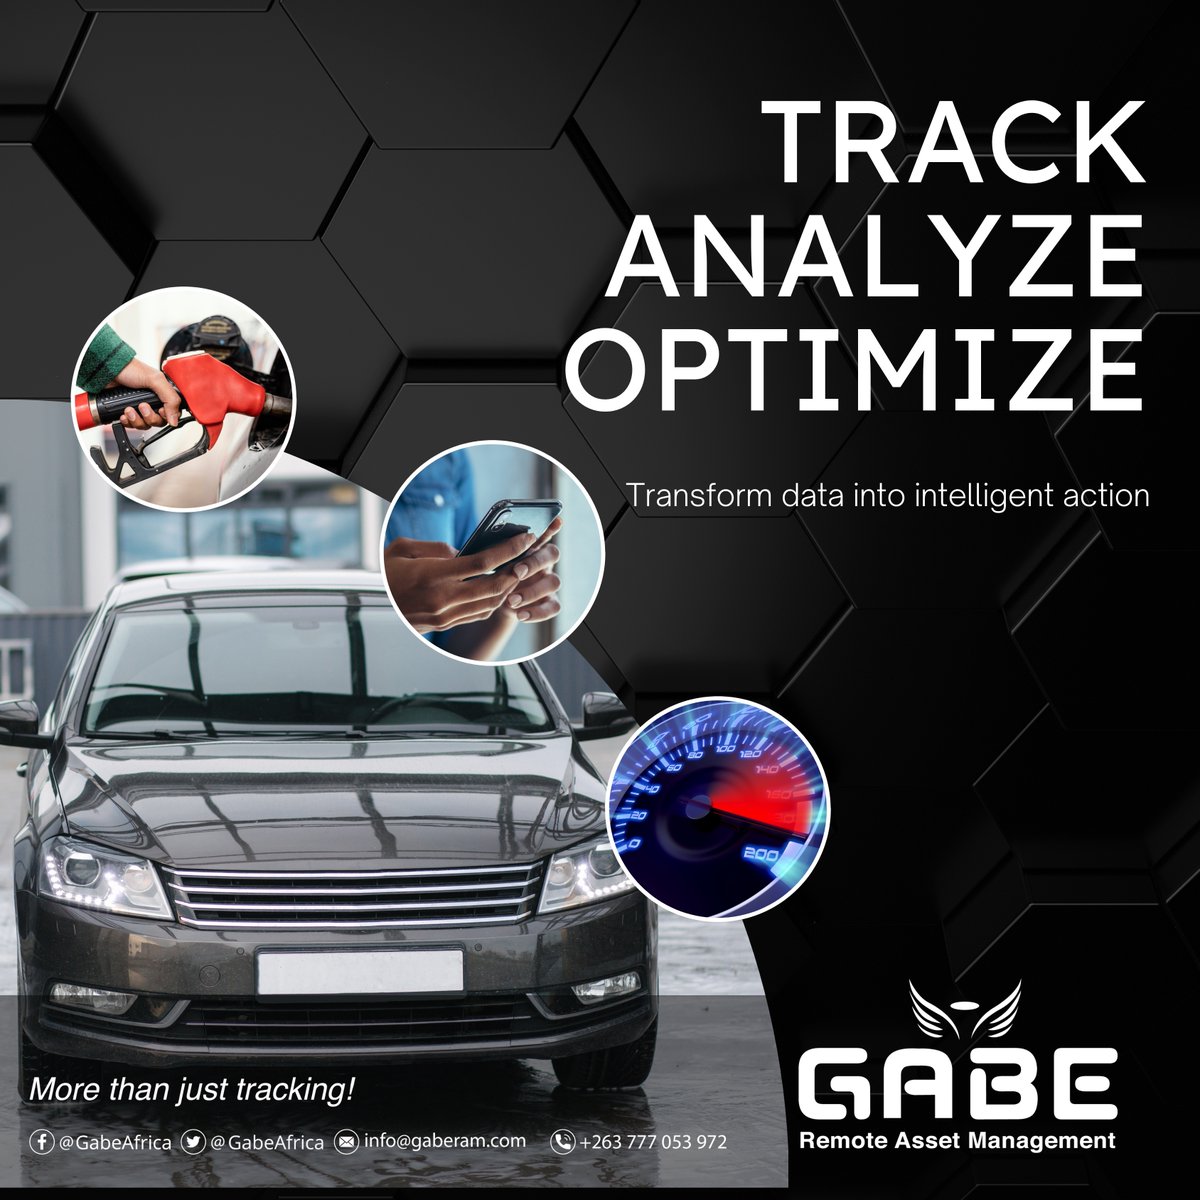 Boost Profits, Minimize Risks: Harness Data Insights for Smarter Fleet Management. Take charge with our tracking solutions!! #GabeIt #Zimbabwe #cartracking #telemetry #smartbusiness #iot